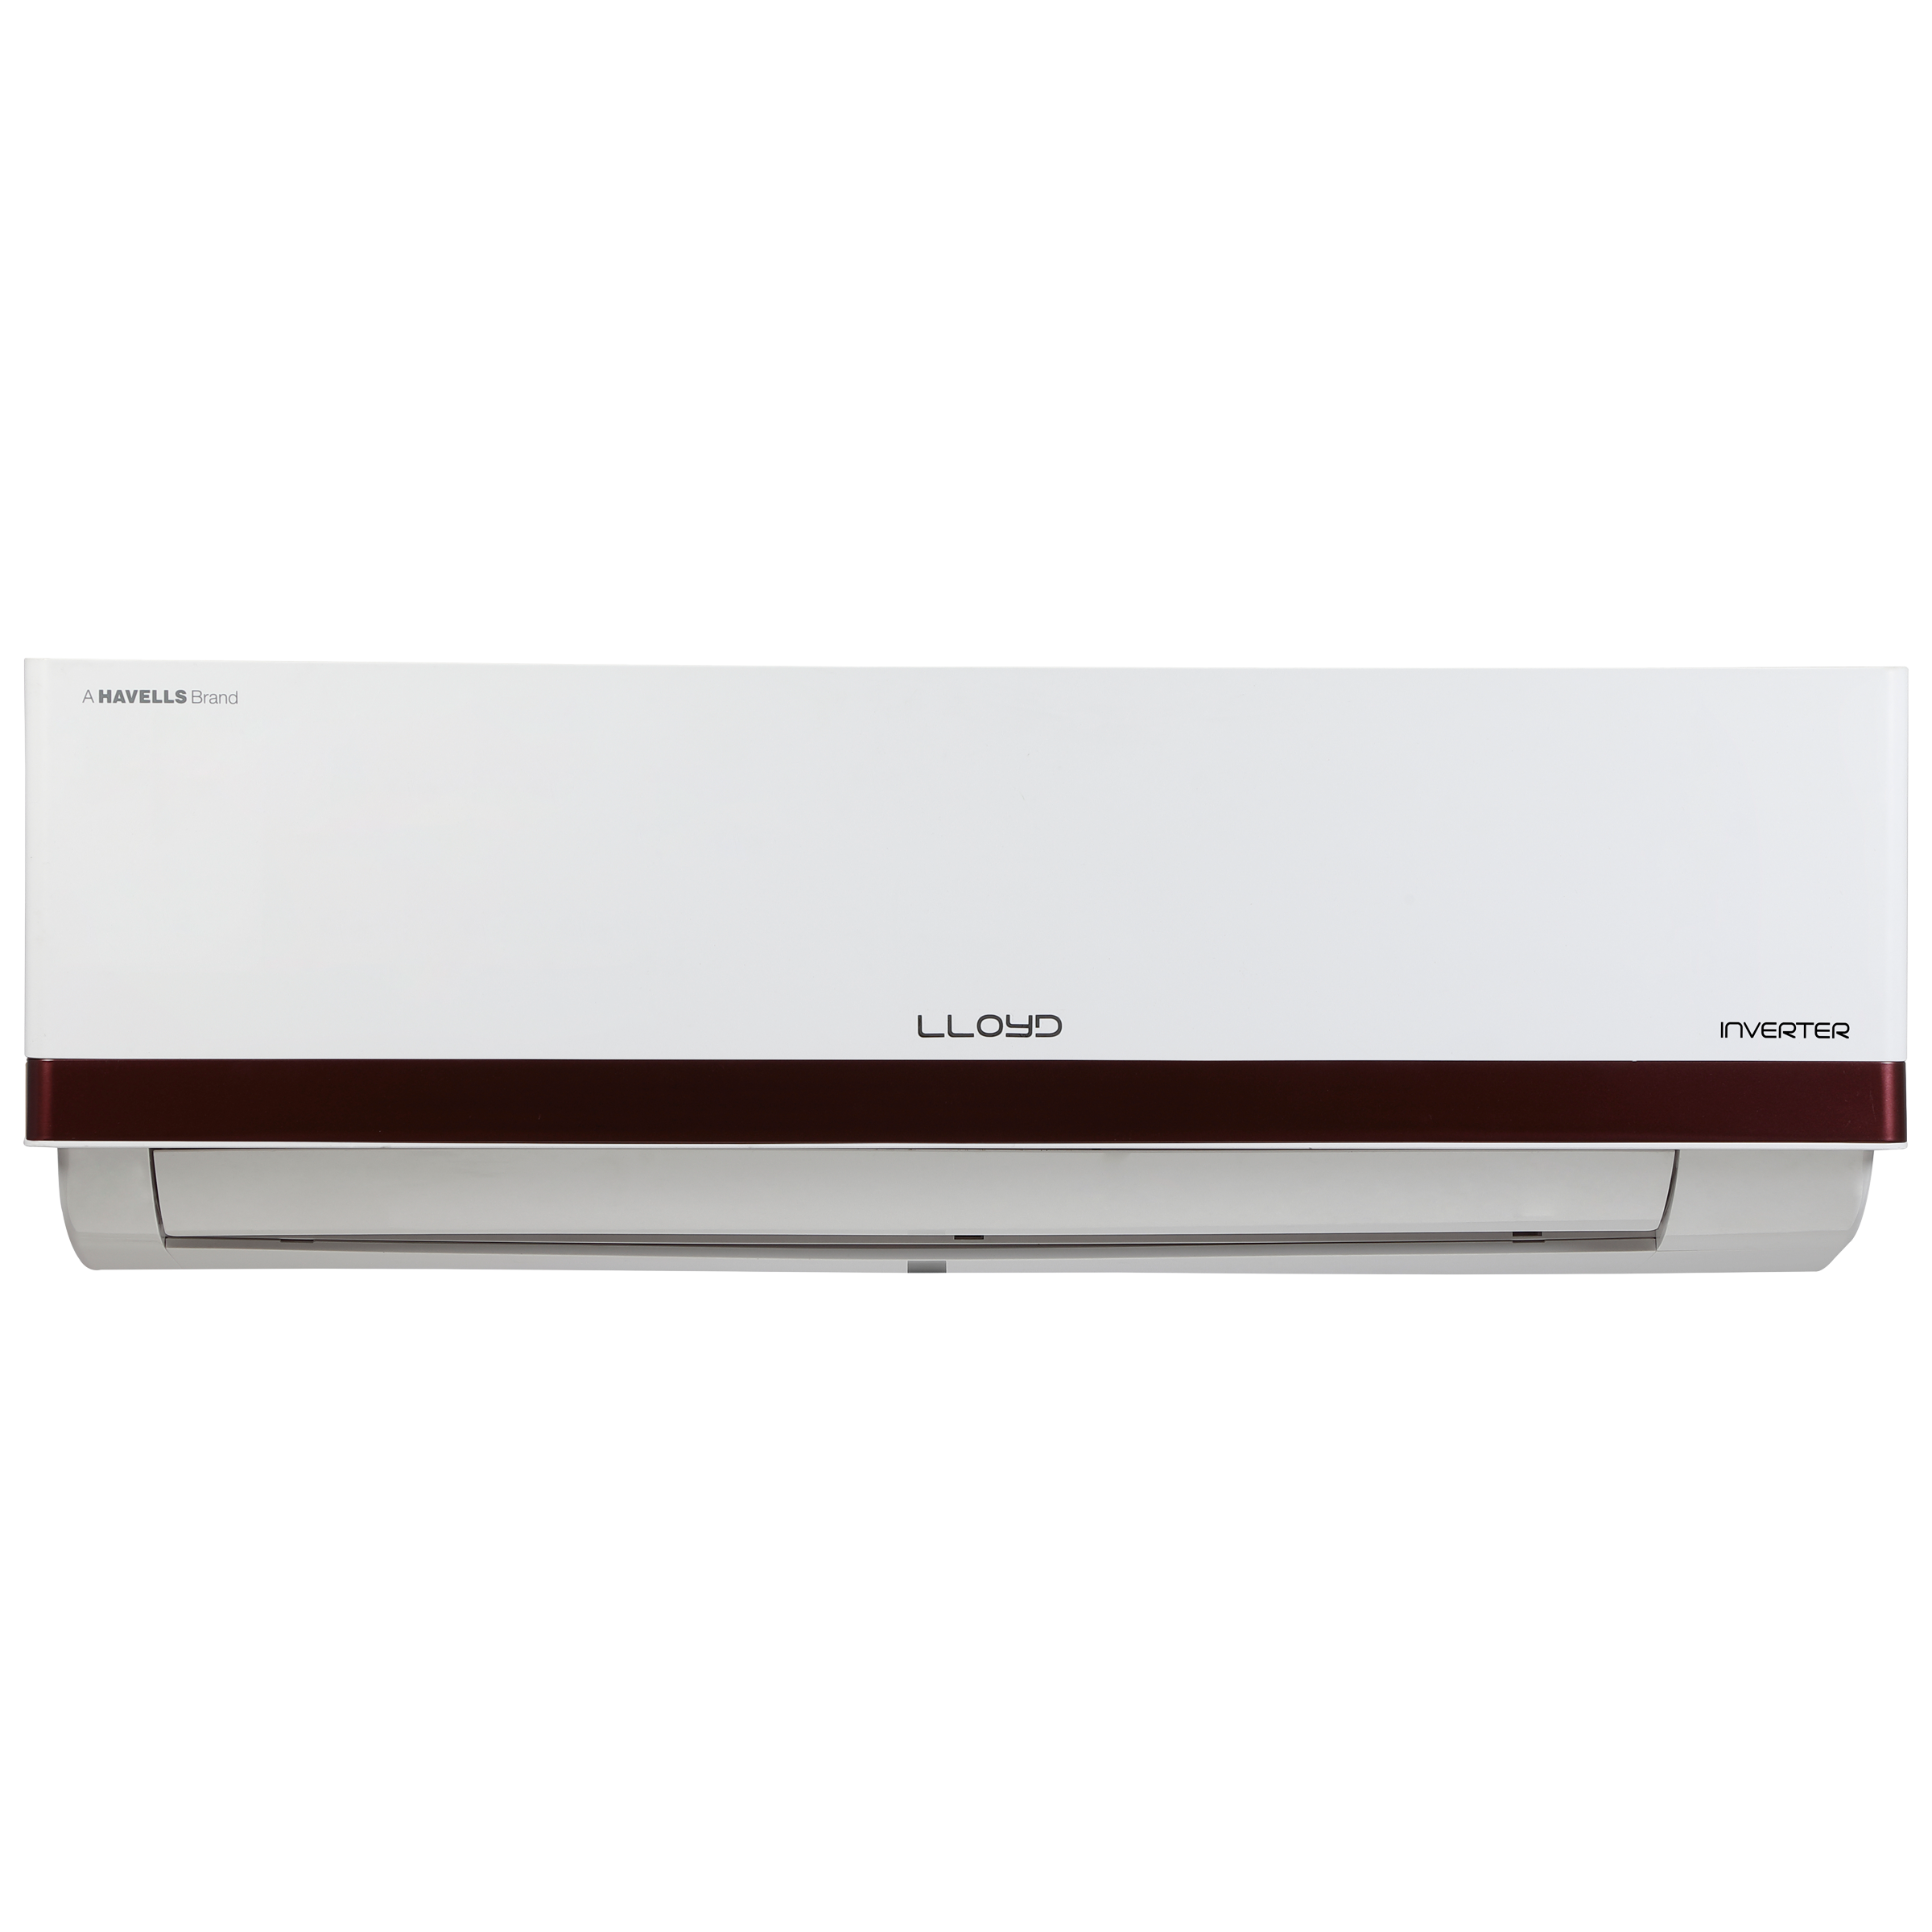 Lloyd 5 in 1 Convertible 1.5 Ton 5 Star Inverter Split Smart AC with Rapid Cooling Function (Copper Condenser, GLS18I5FWRBA)